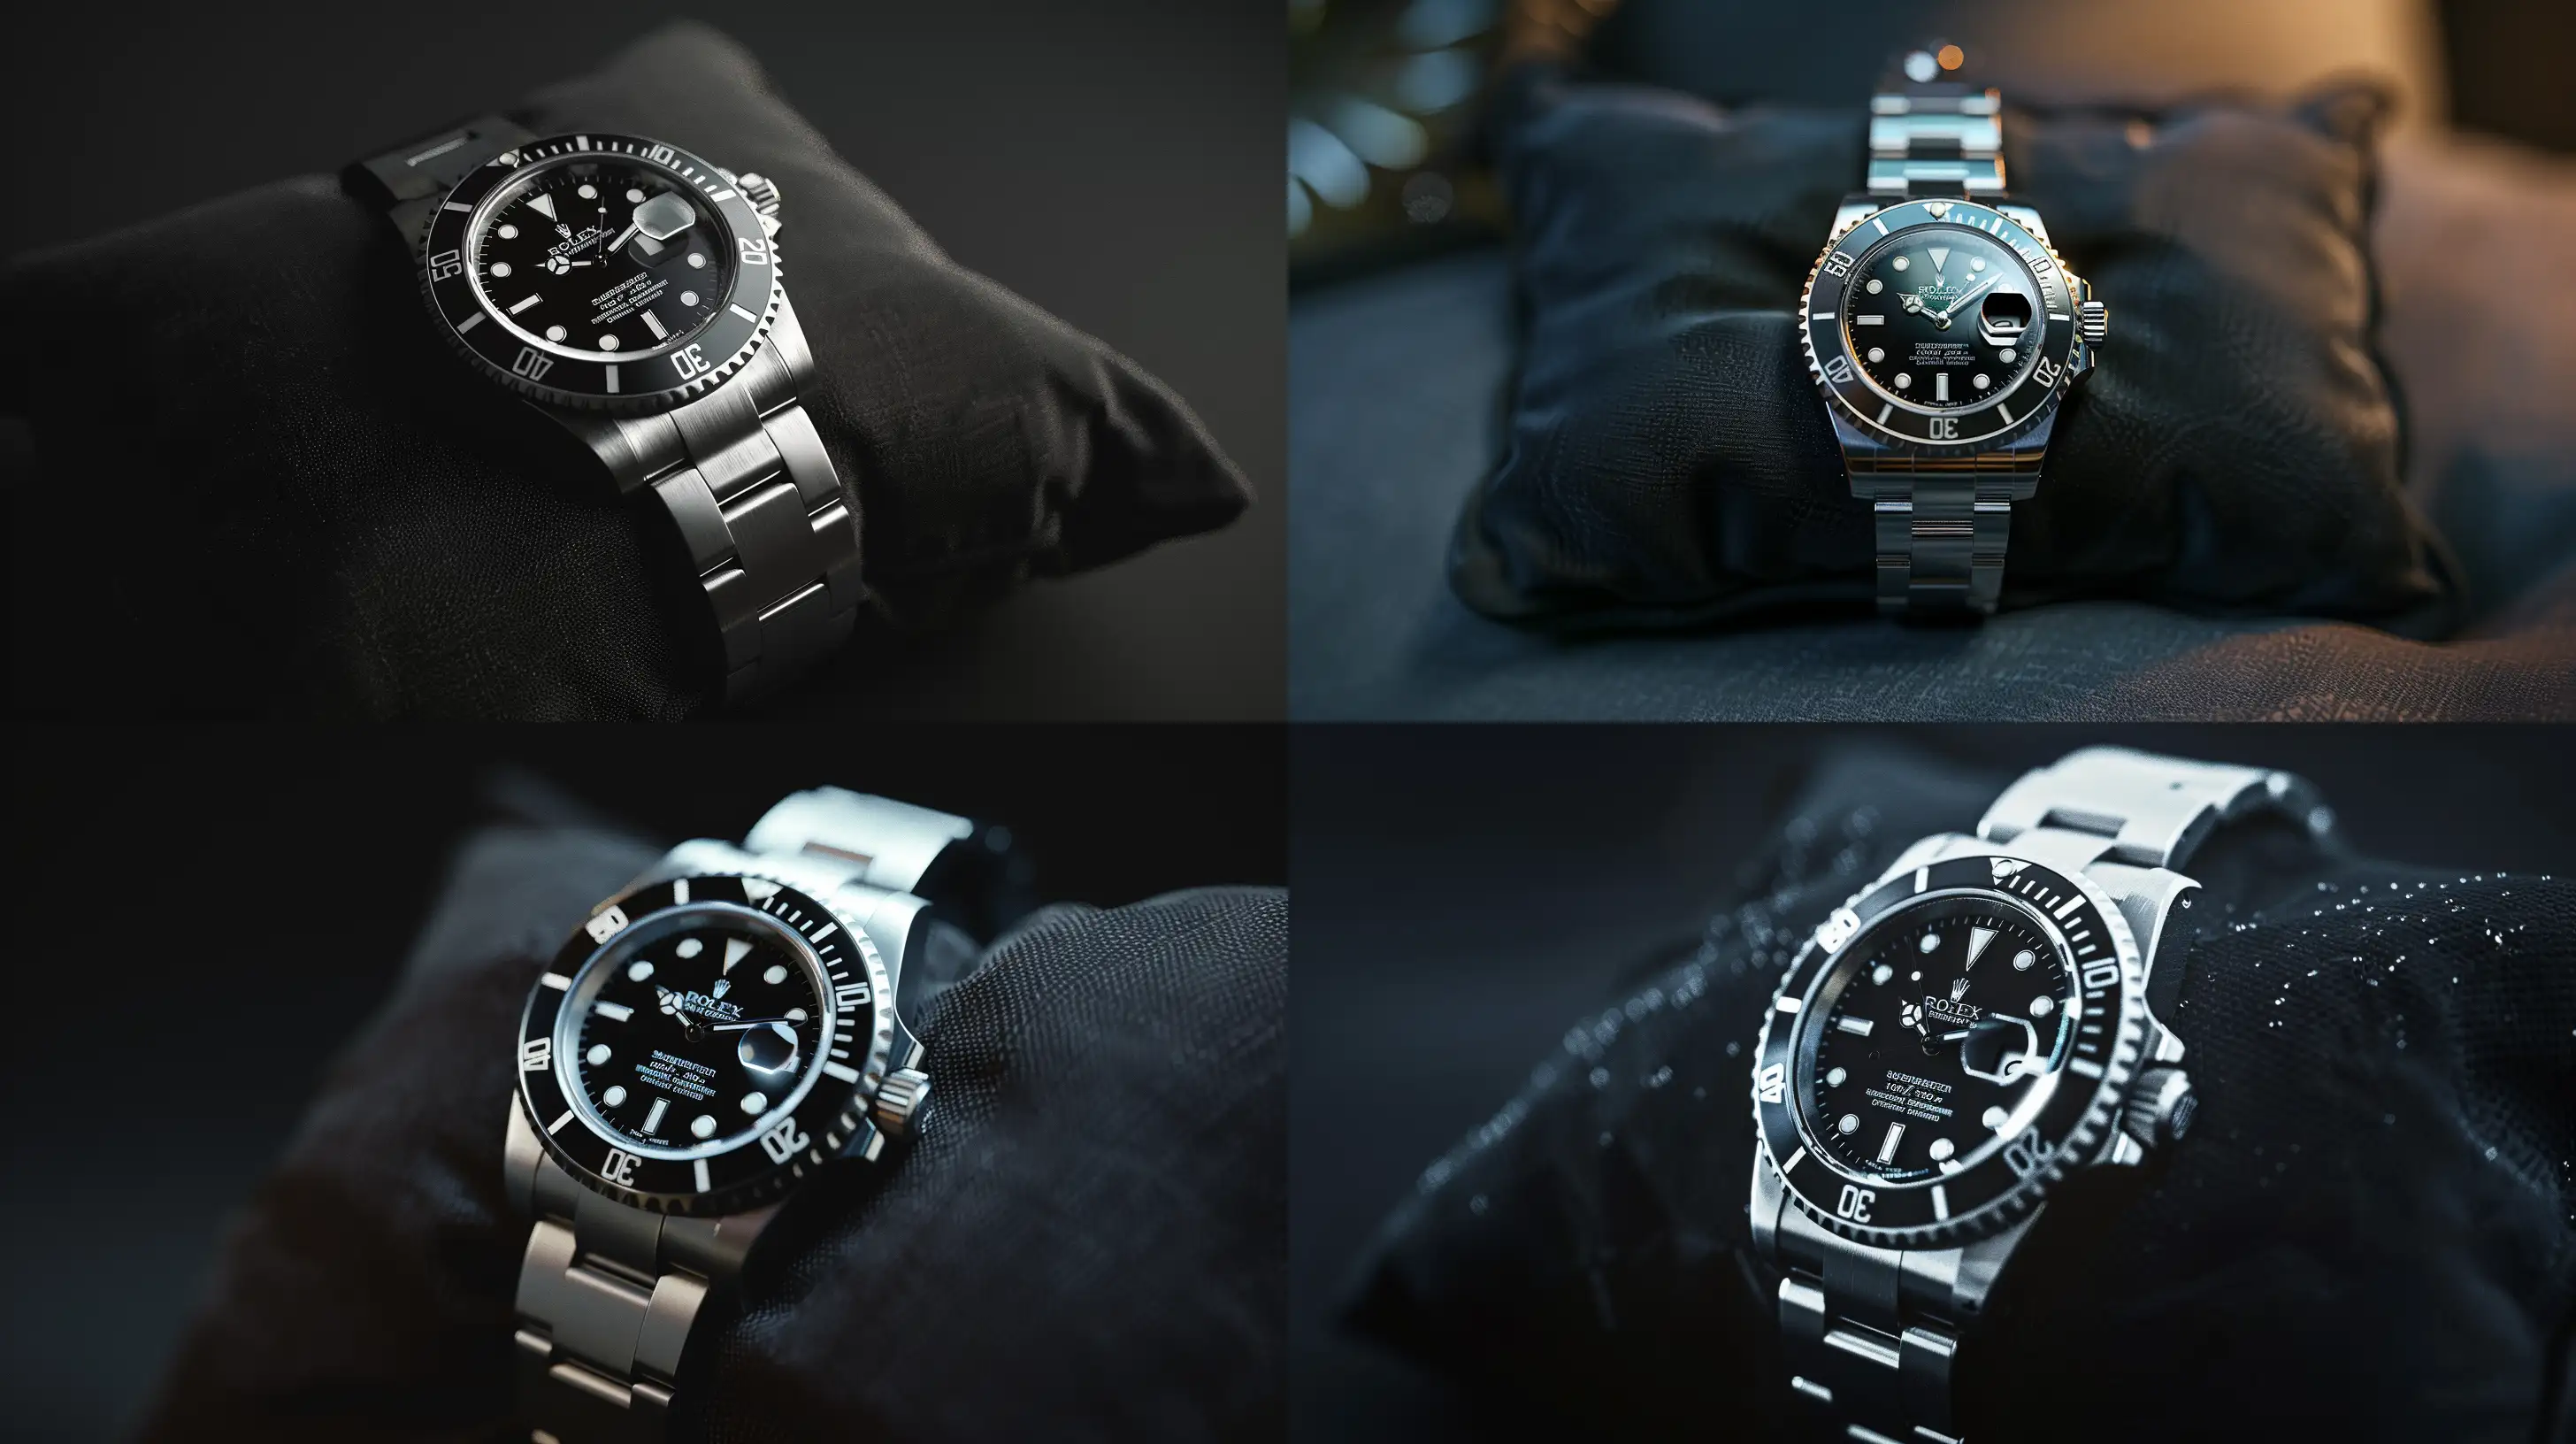 Luxurious-Rolex-Submariner-Watch-on-Cushion-Professional-Color-Grading-and-Soft-Shadows